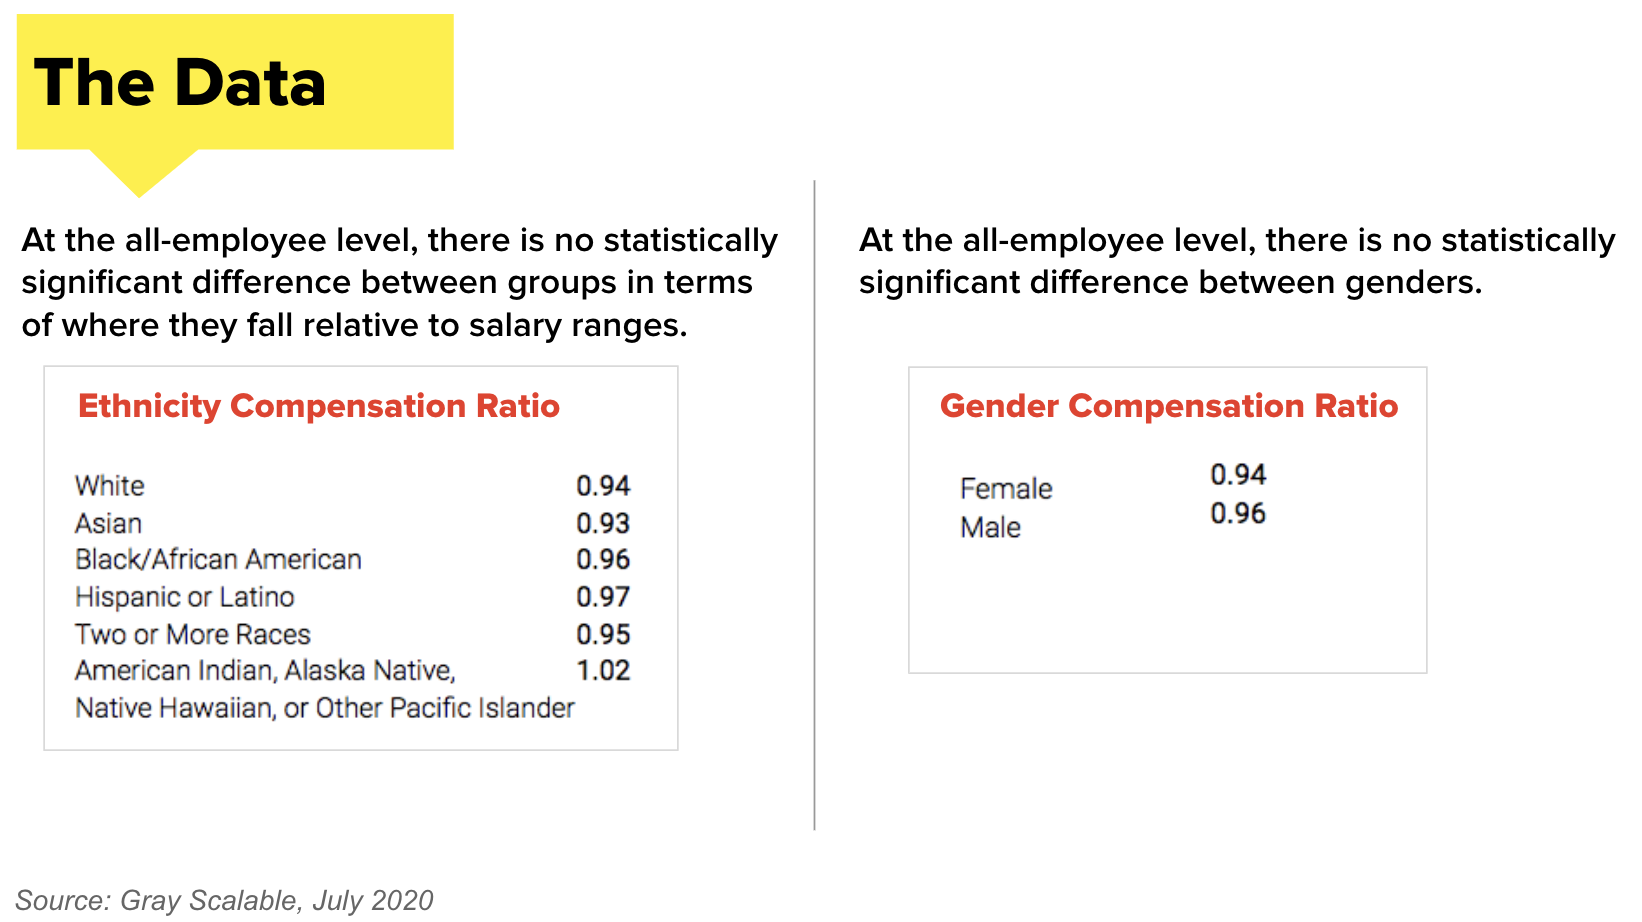 This image shows that there is no statistically significant differences in pay between race/ethnicity groups or genders within current levels at BuzzFeed.